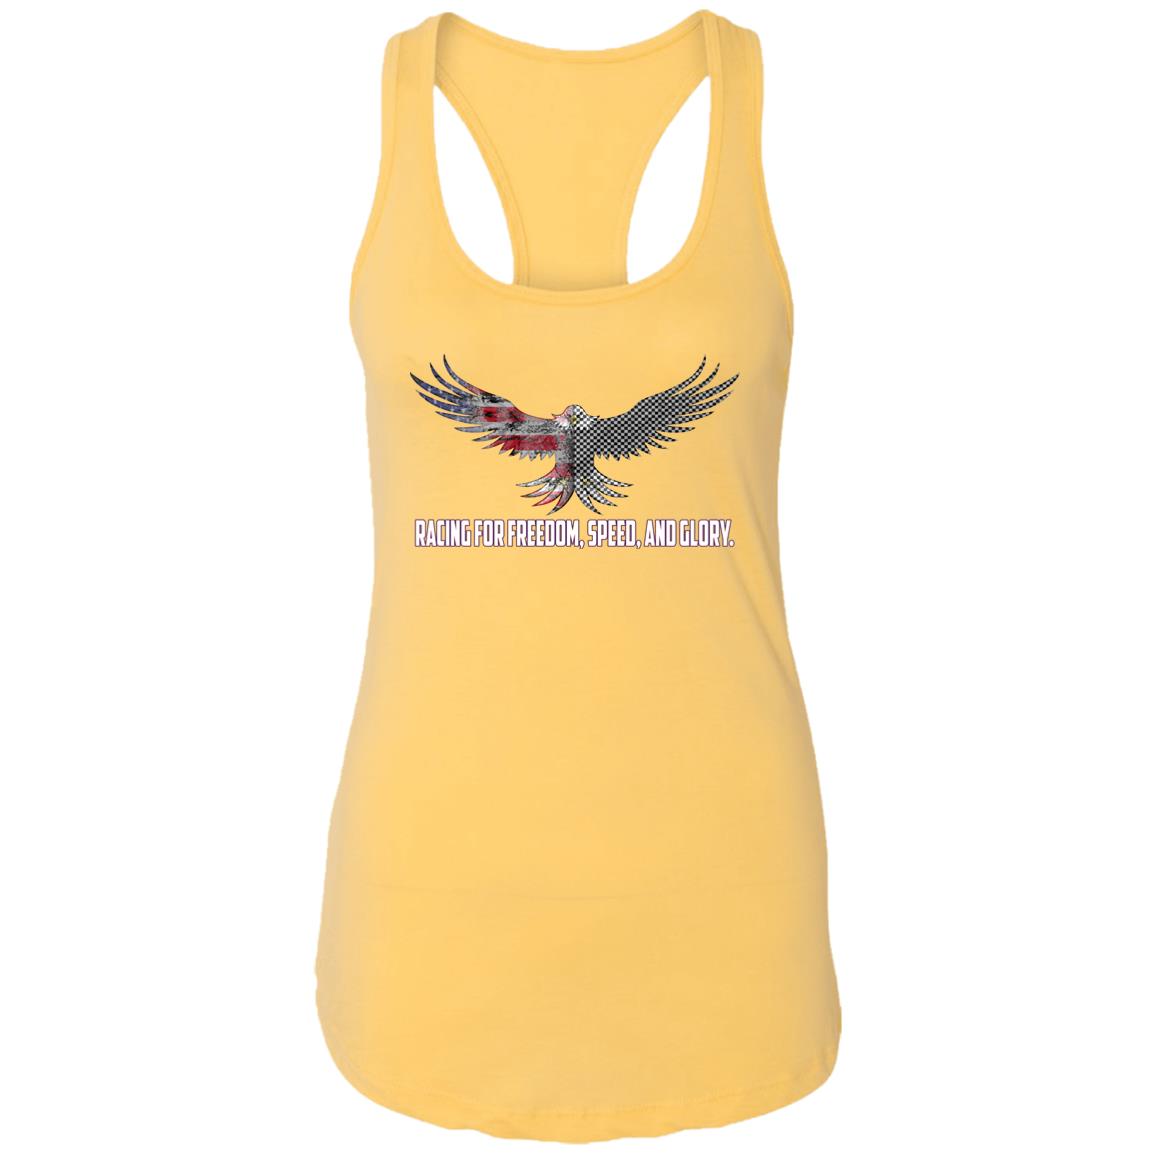 Racing For Freedom, Speed, And Glory Ladies Ideal Racerback Tank